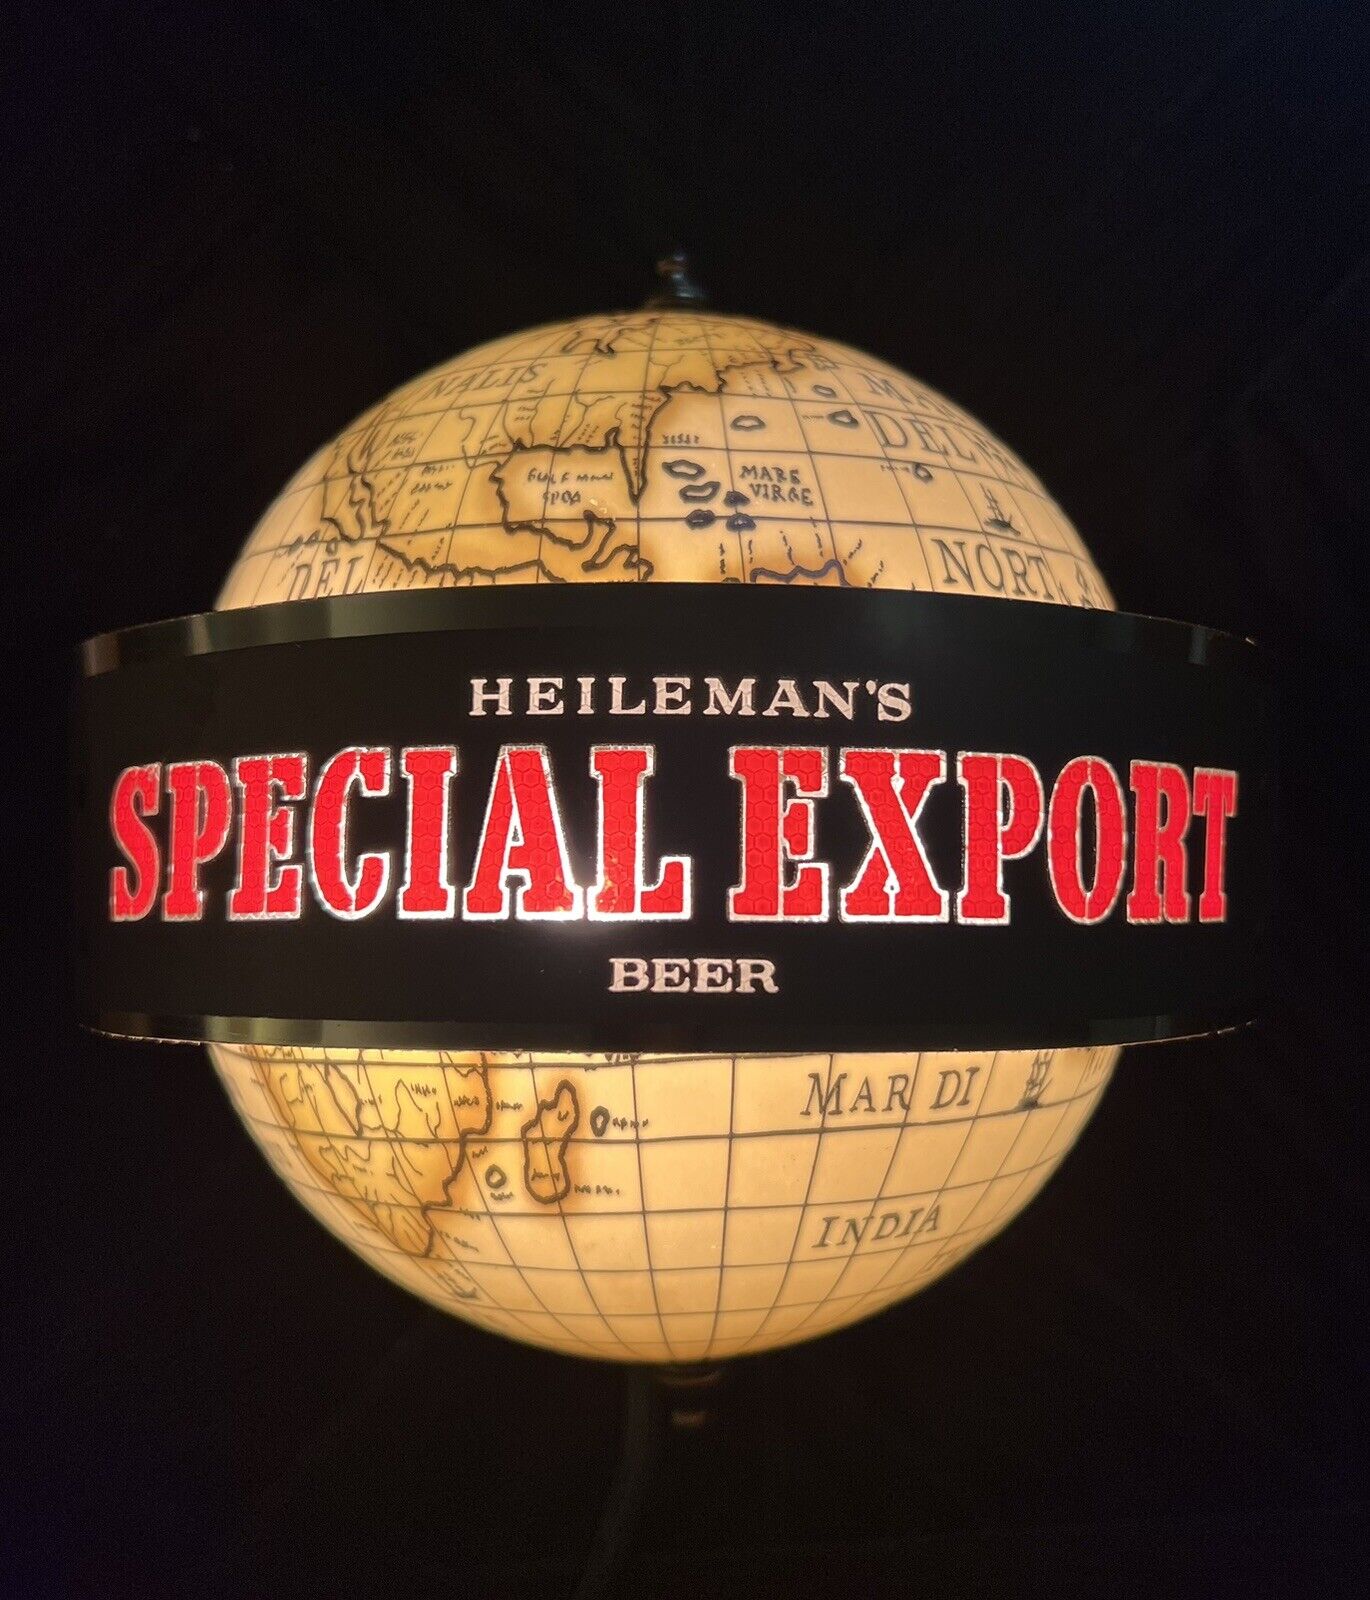 Heileman’s Special Export Beer Motion  Rotating Earth Globe Bar Light Sign. Read